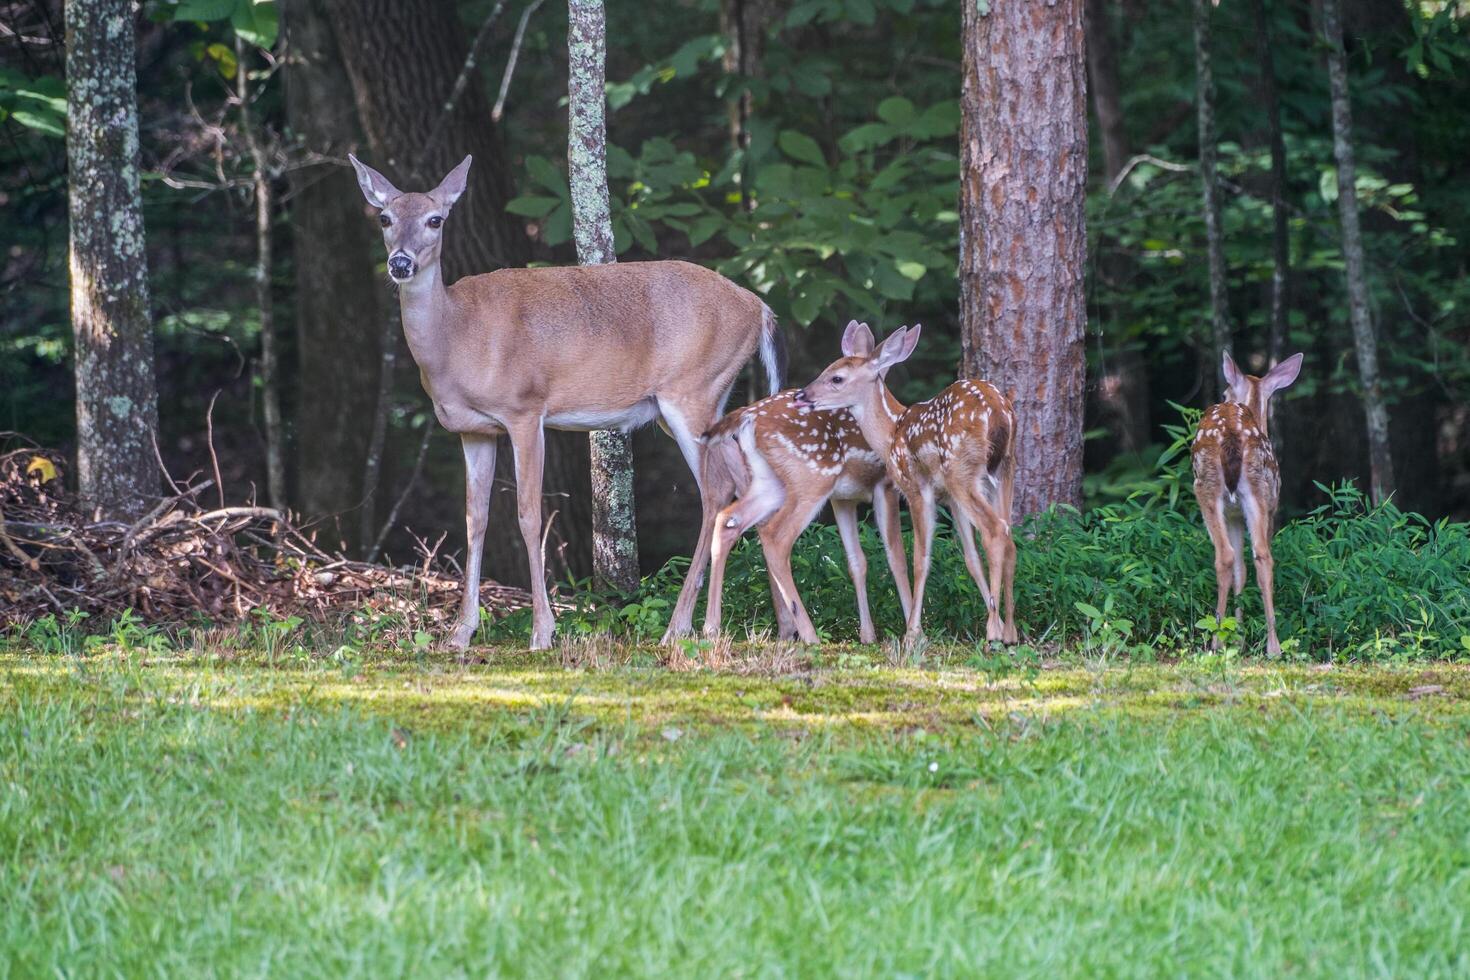 Mama deer and her triplets photo